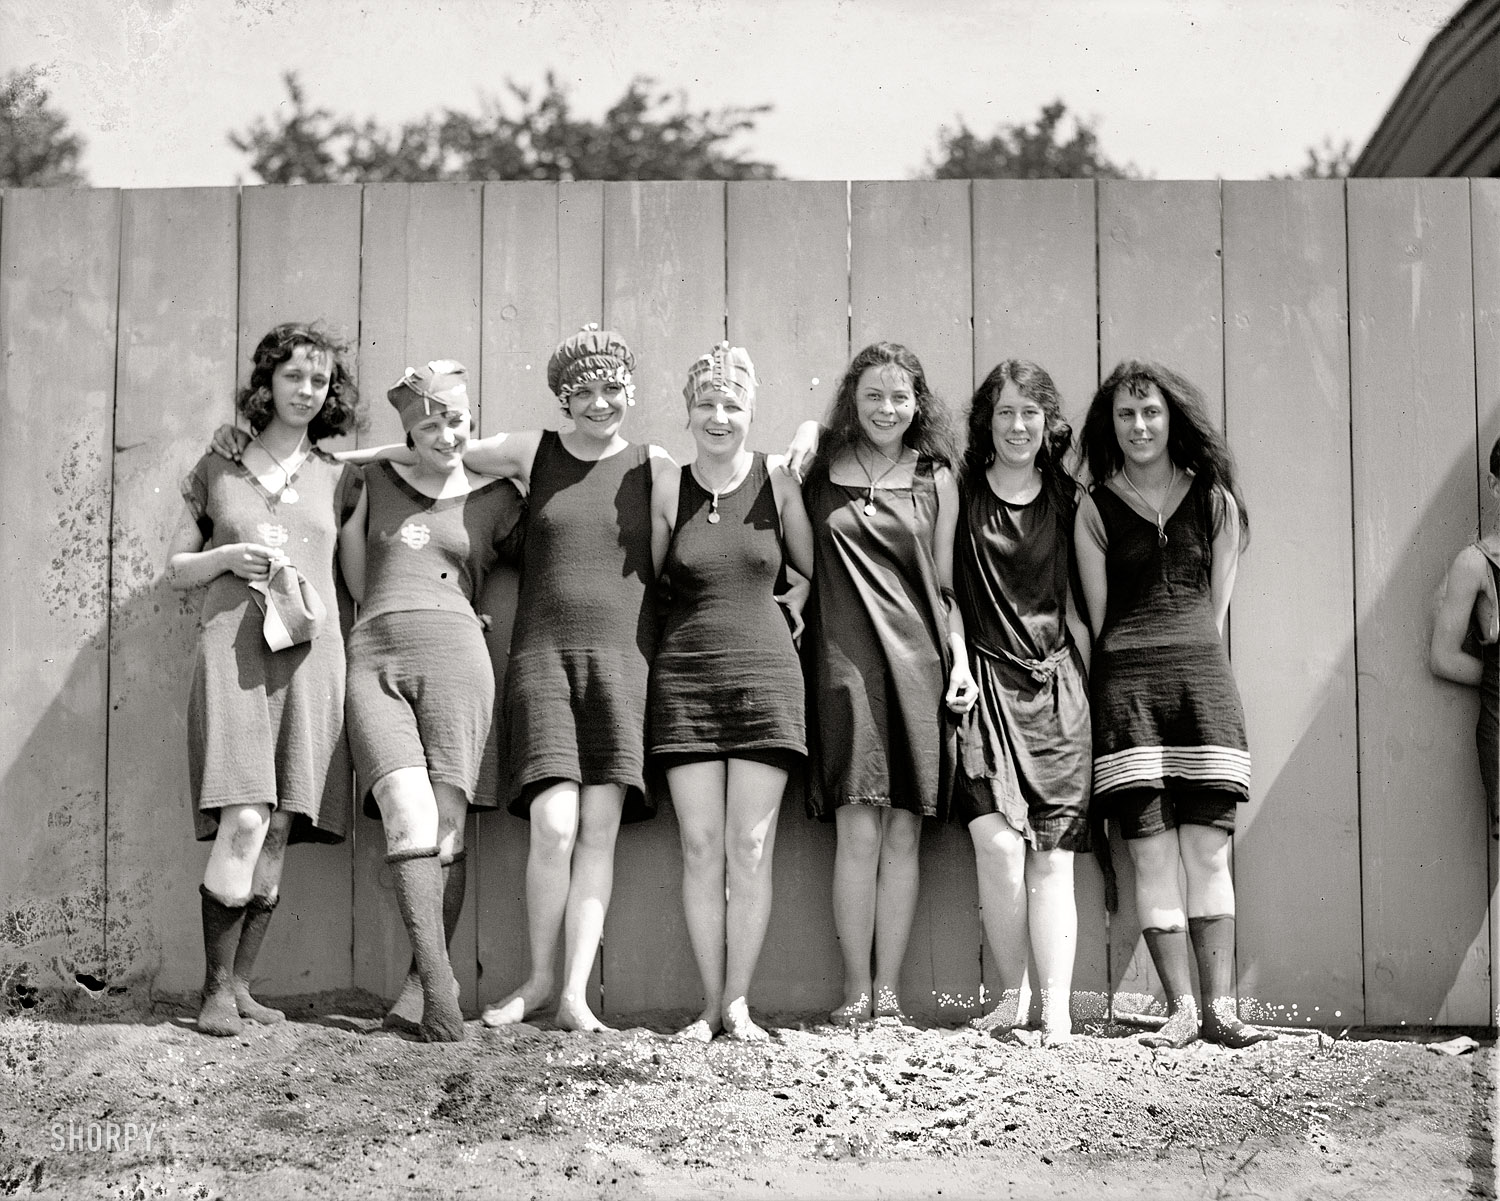 "Bathing beach, 1920." Seven lovelies at the Potomac bathing beach near the Tidal Basin. National Photo Company Collection glass negative. View full size.